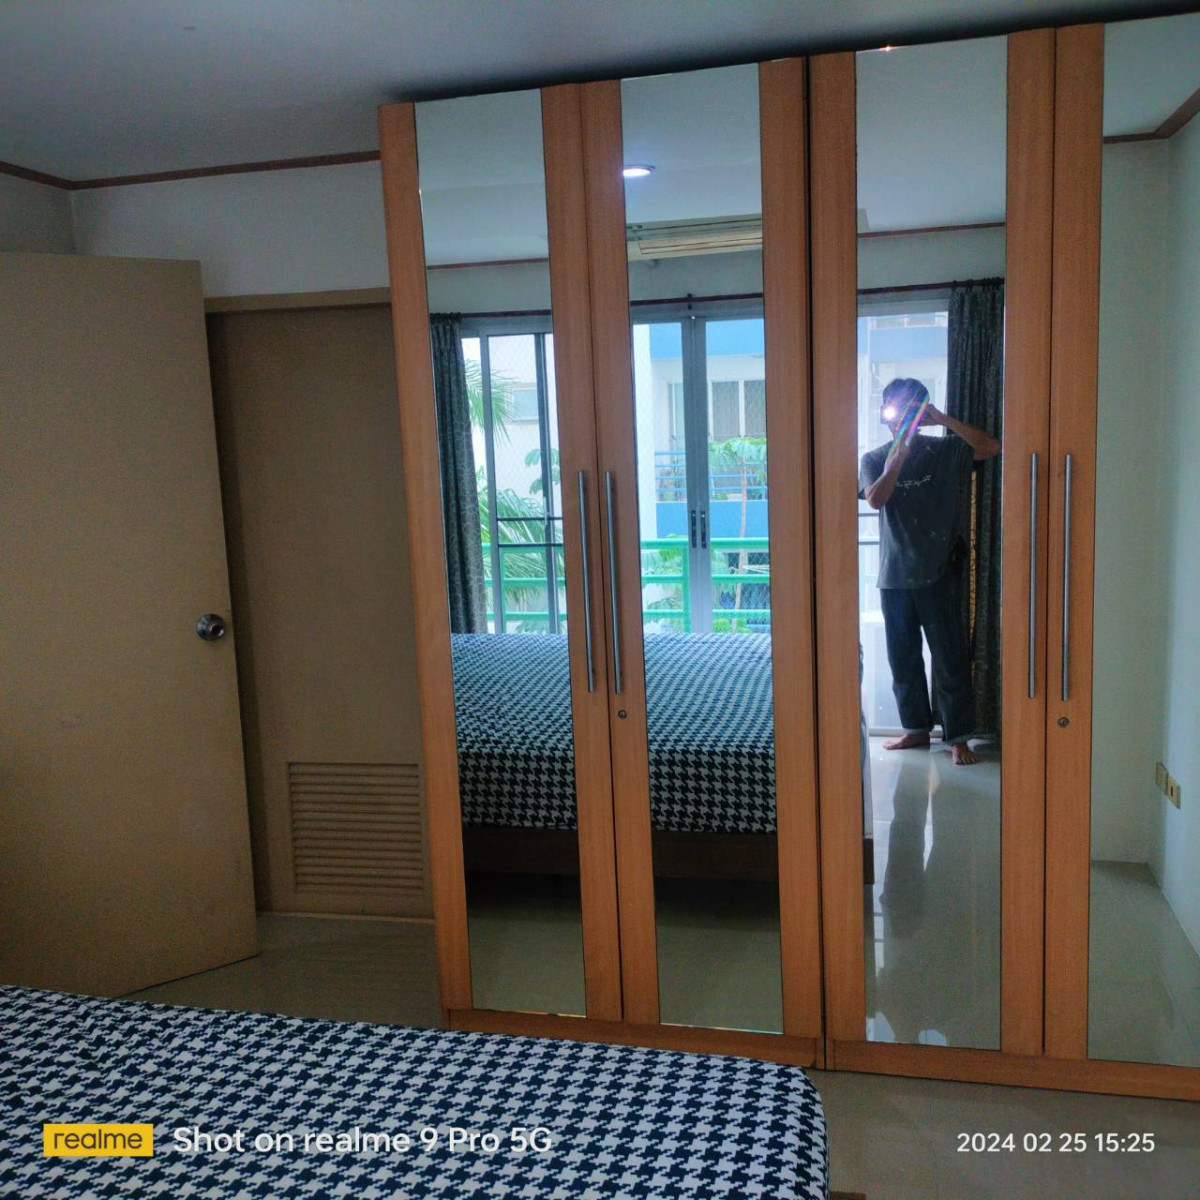 THE WATERFORD RAMA 4 I BTS PHRAKANONG I BEST DEAL OF 1BEDROOM 45.5SQ.M. !!!! I #HL